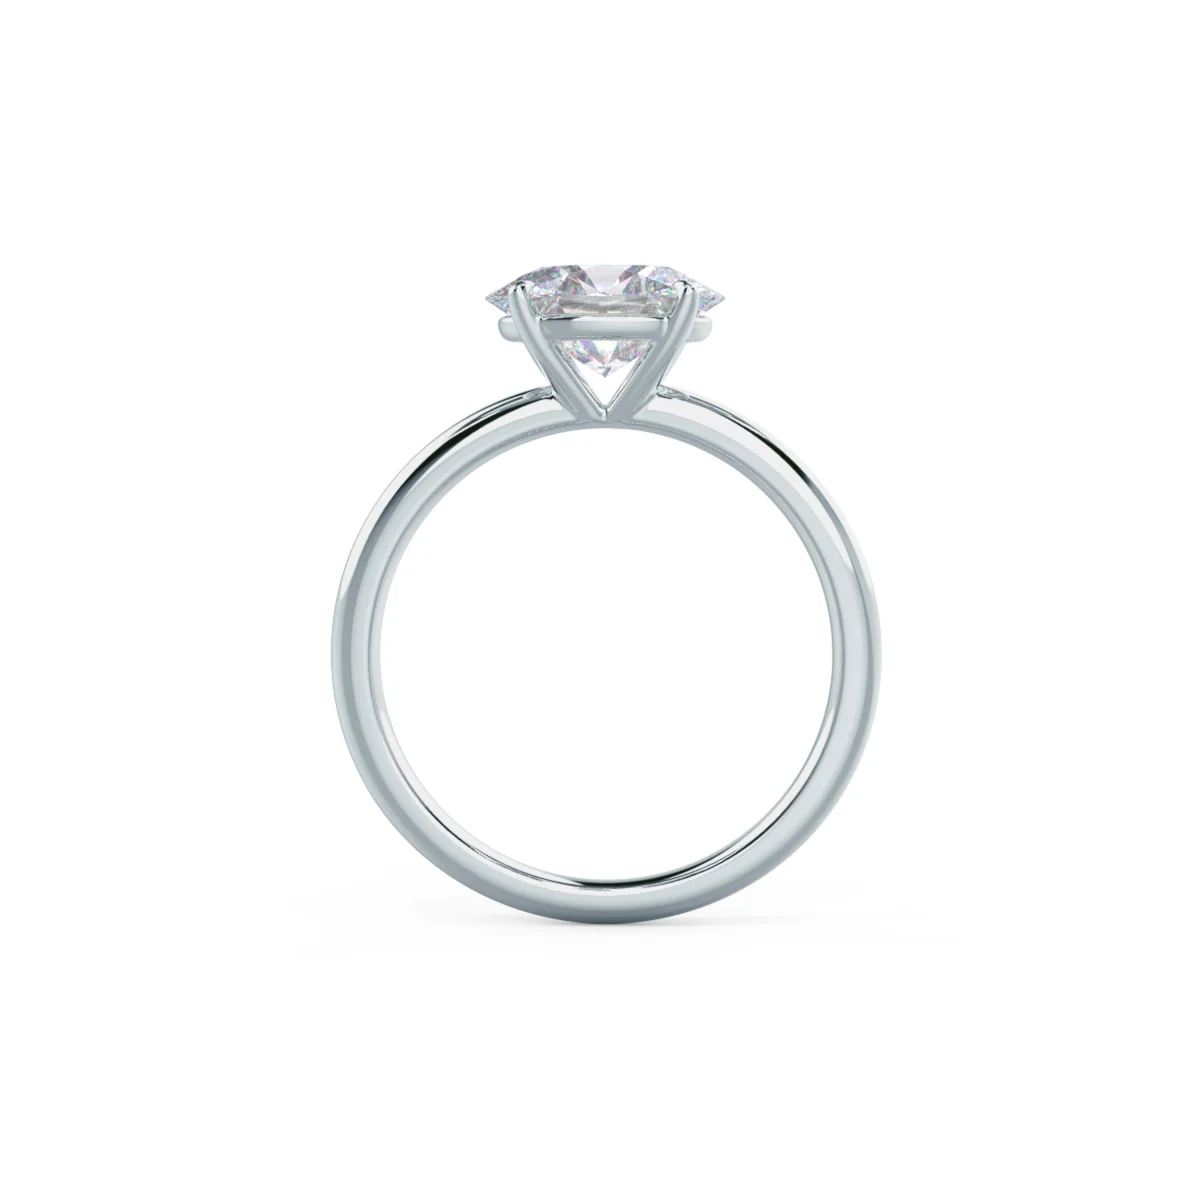 Oval East-West Solitaire Diamond Engagement Ring